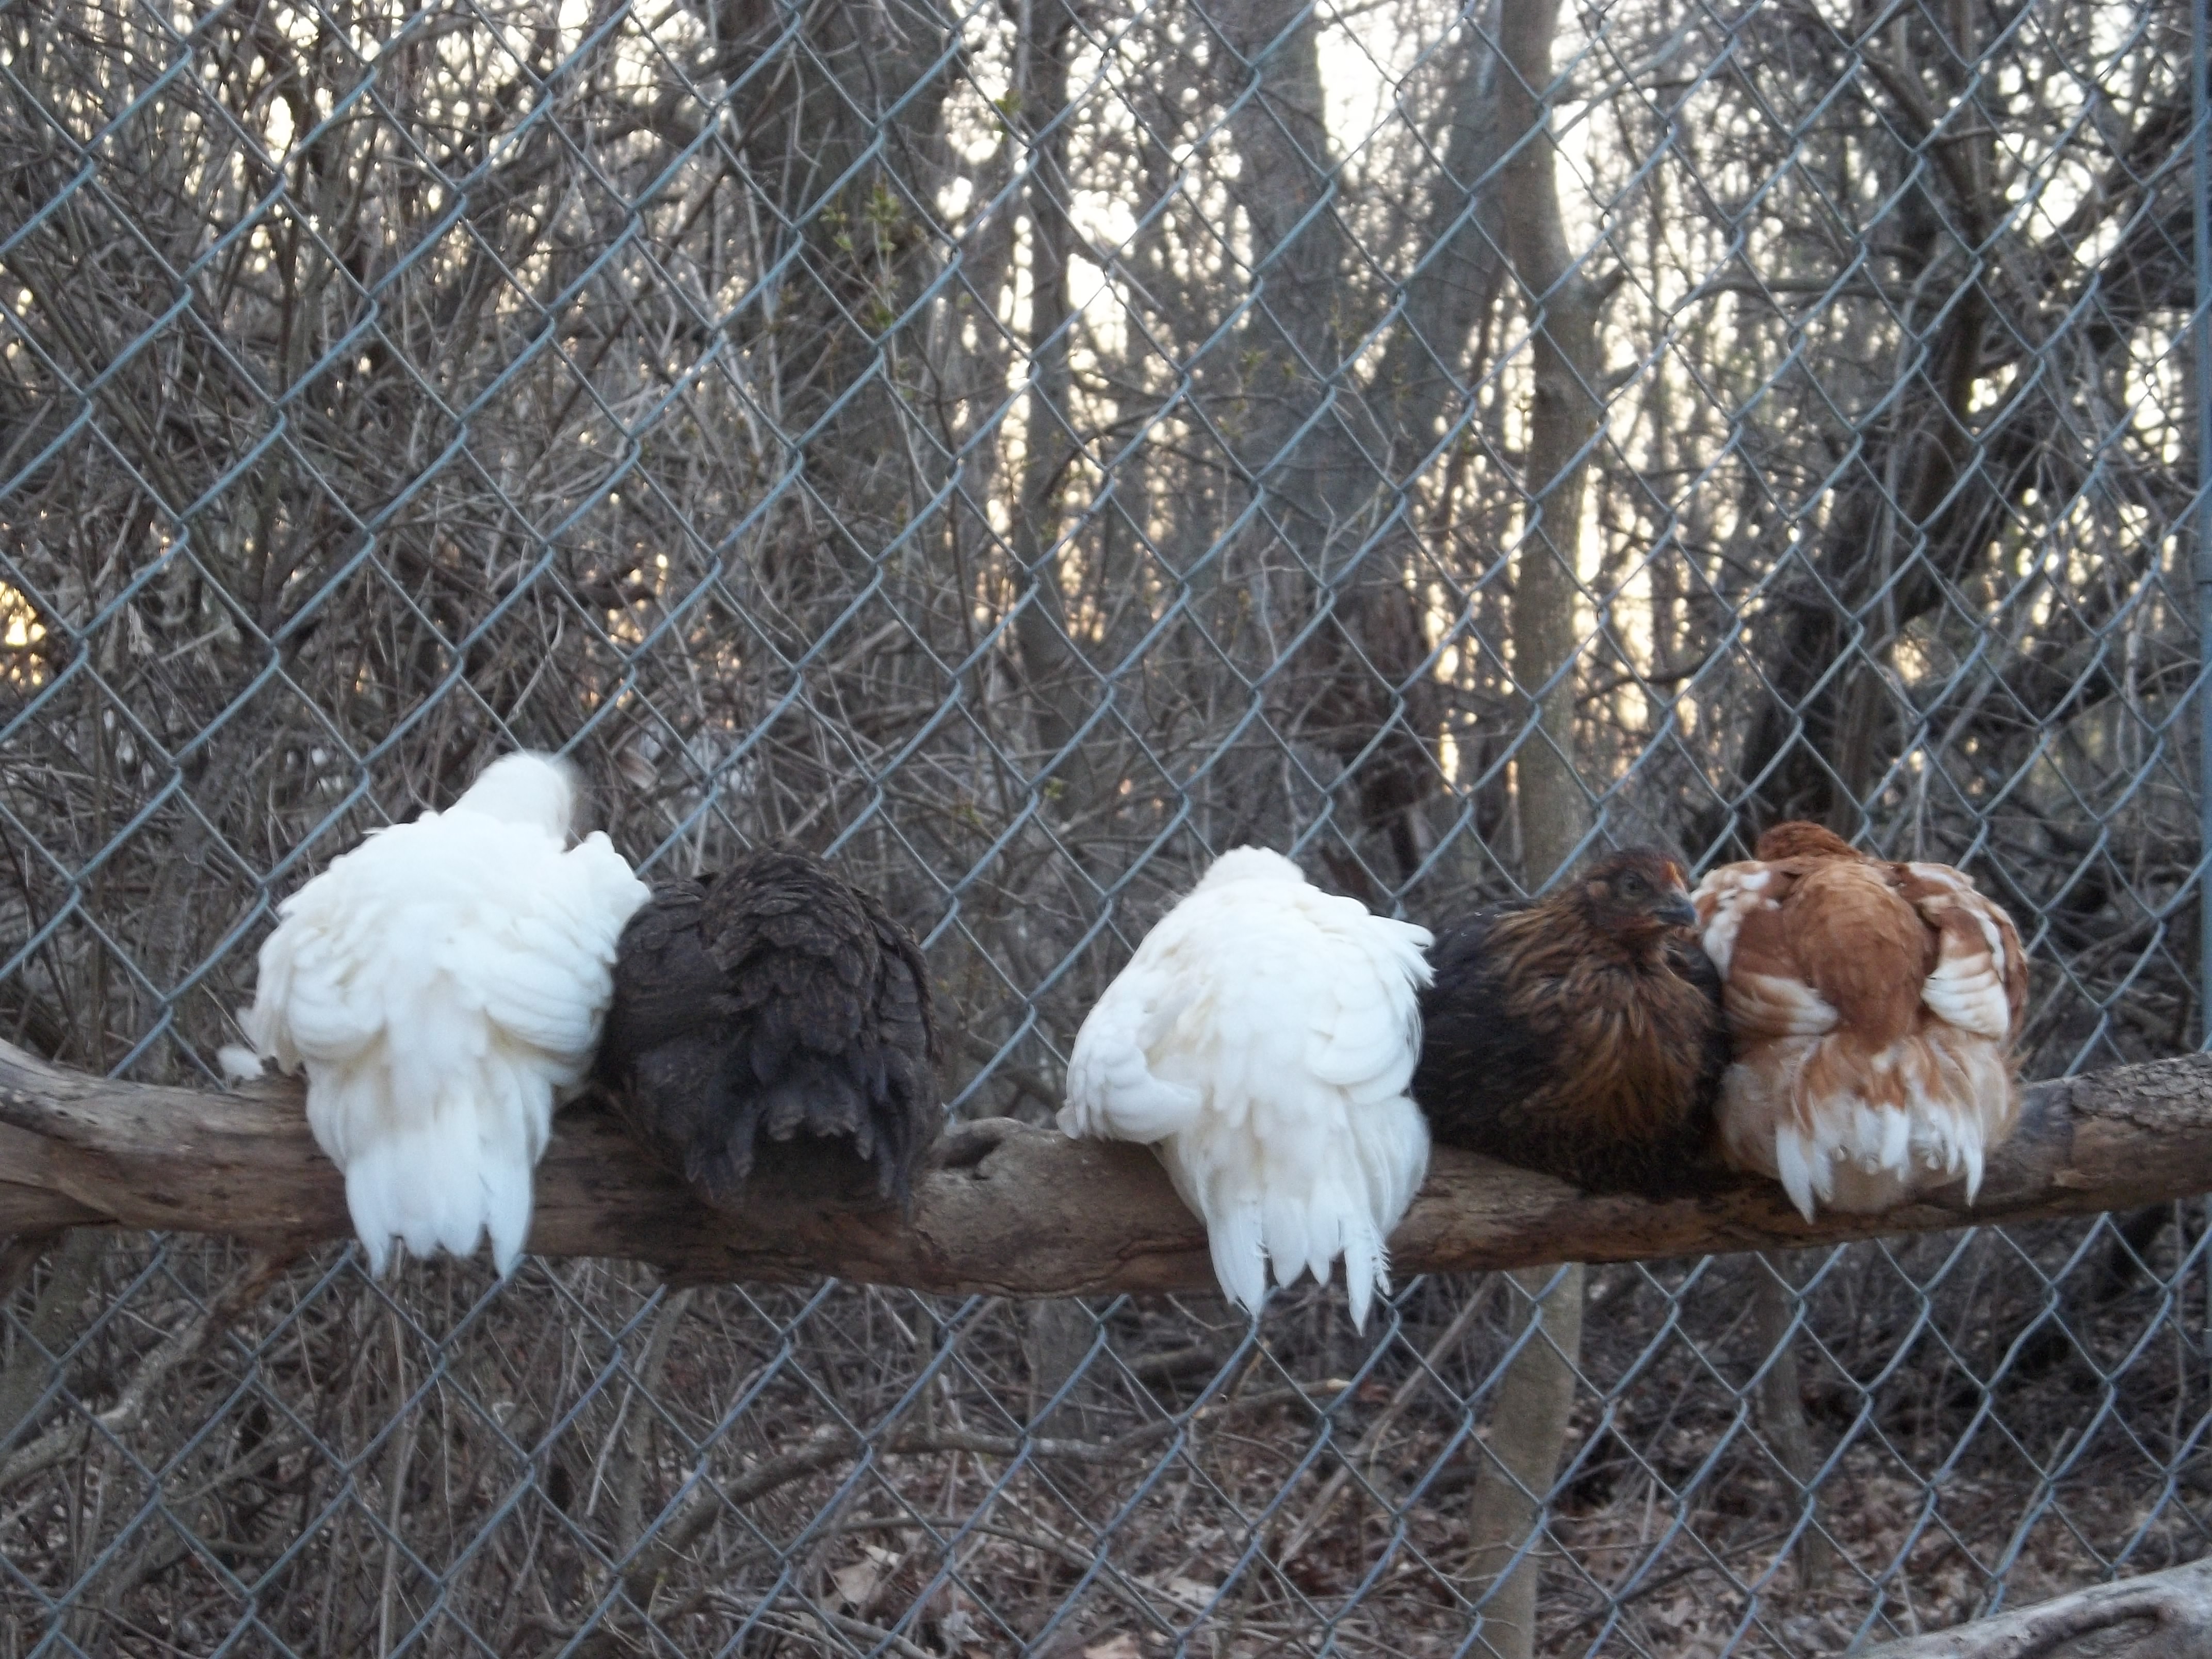 They like the outside roost in the early evening.